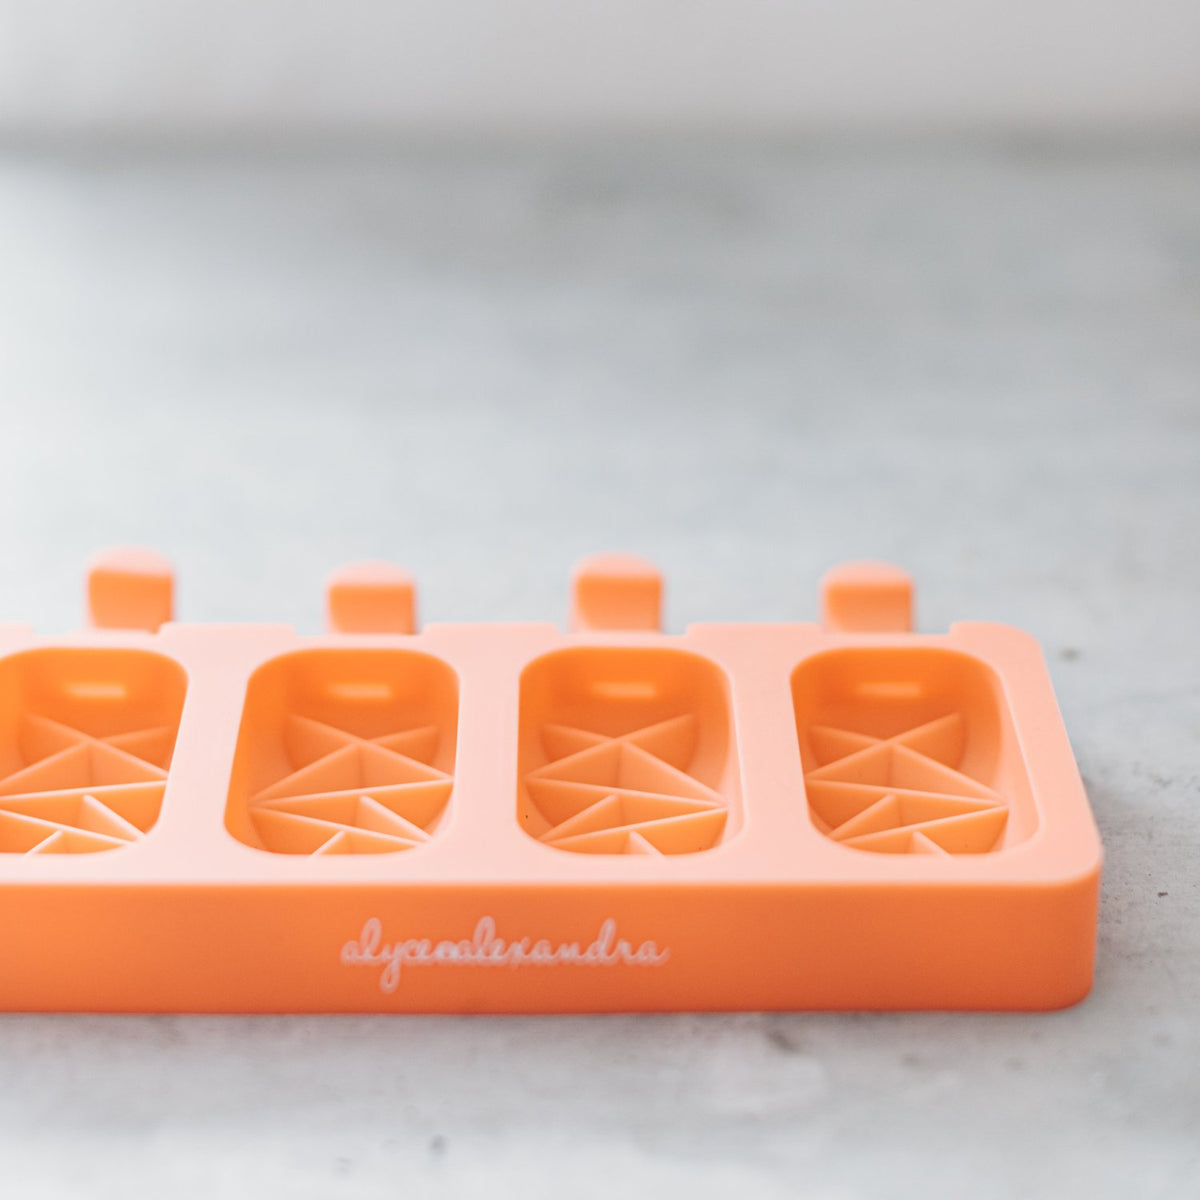 Crystal Ice Cream Moulds + Free Sticks